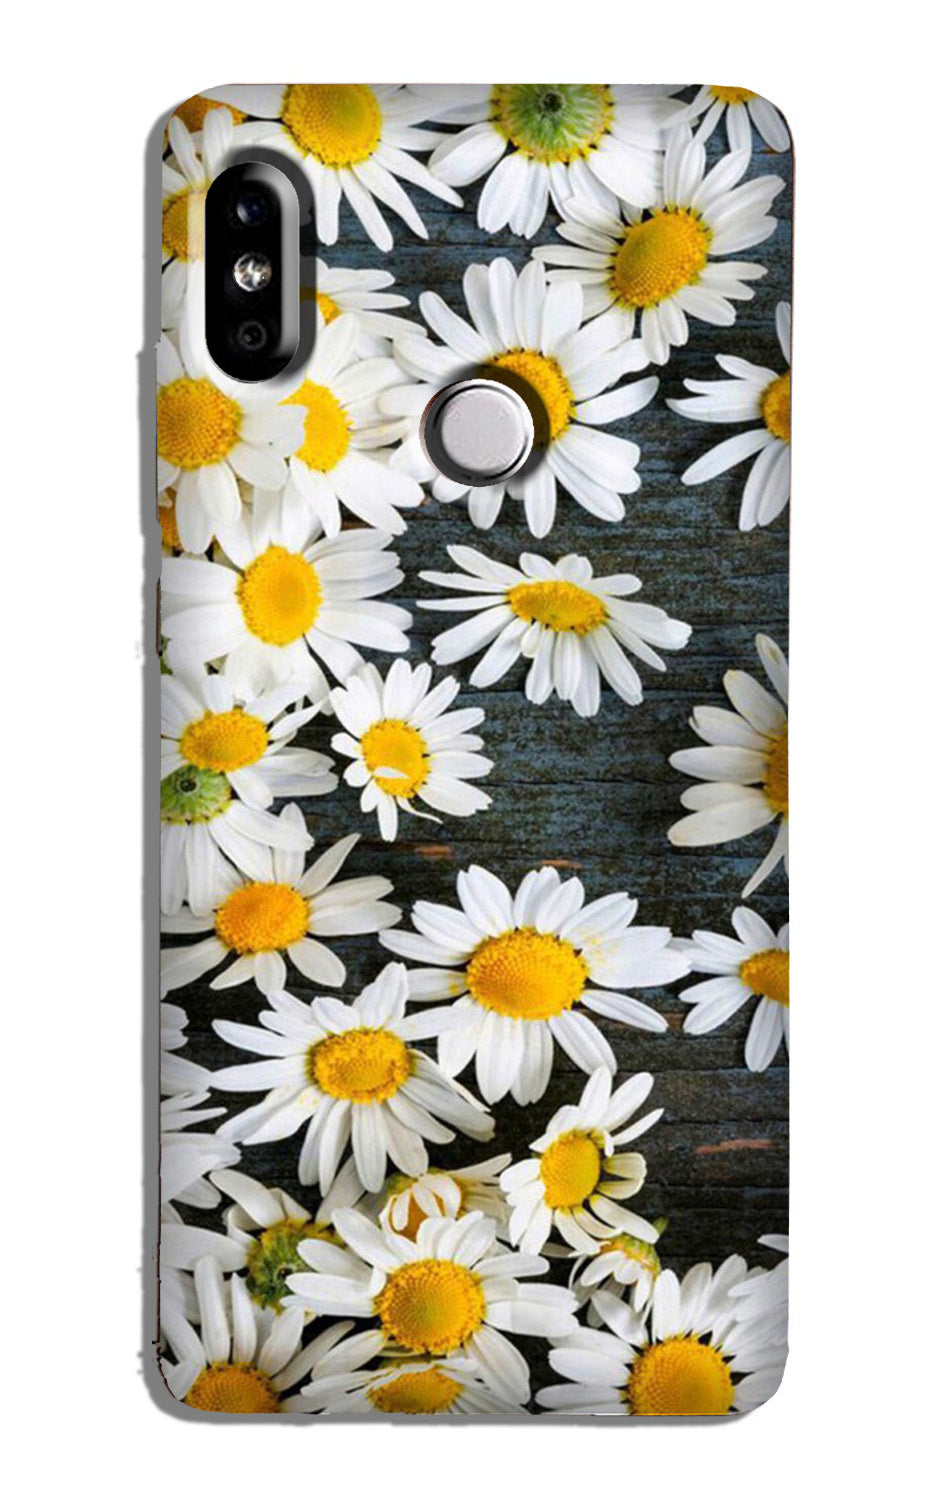 White flowers2 Case for Redmi Note 6 Pro